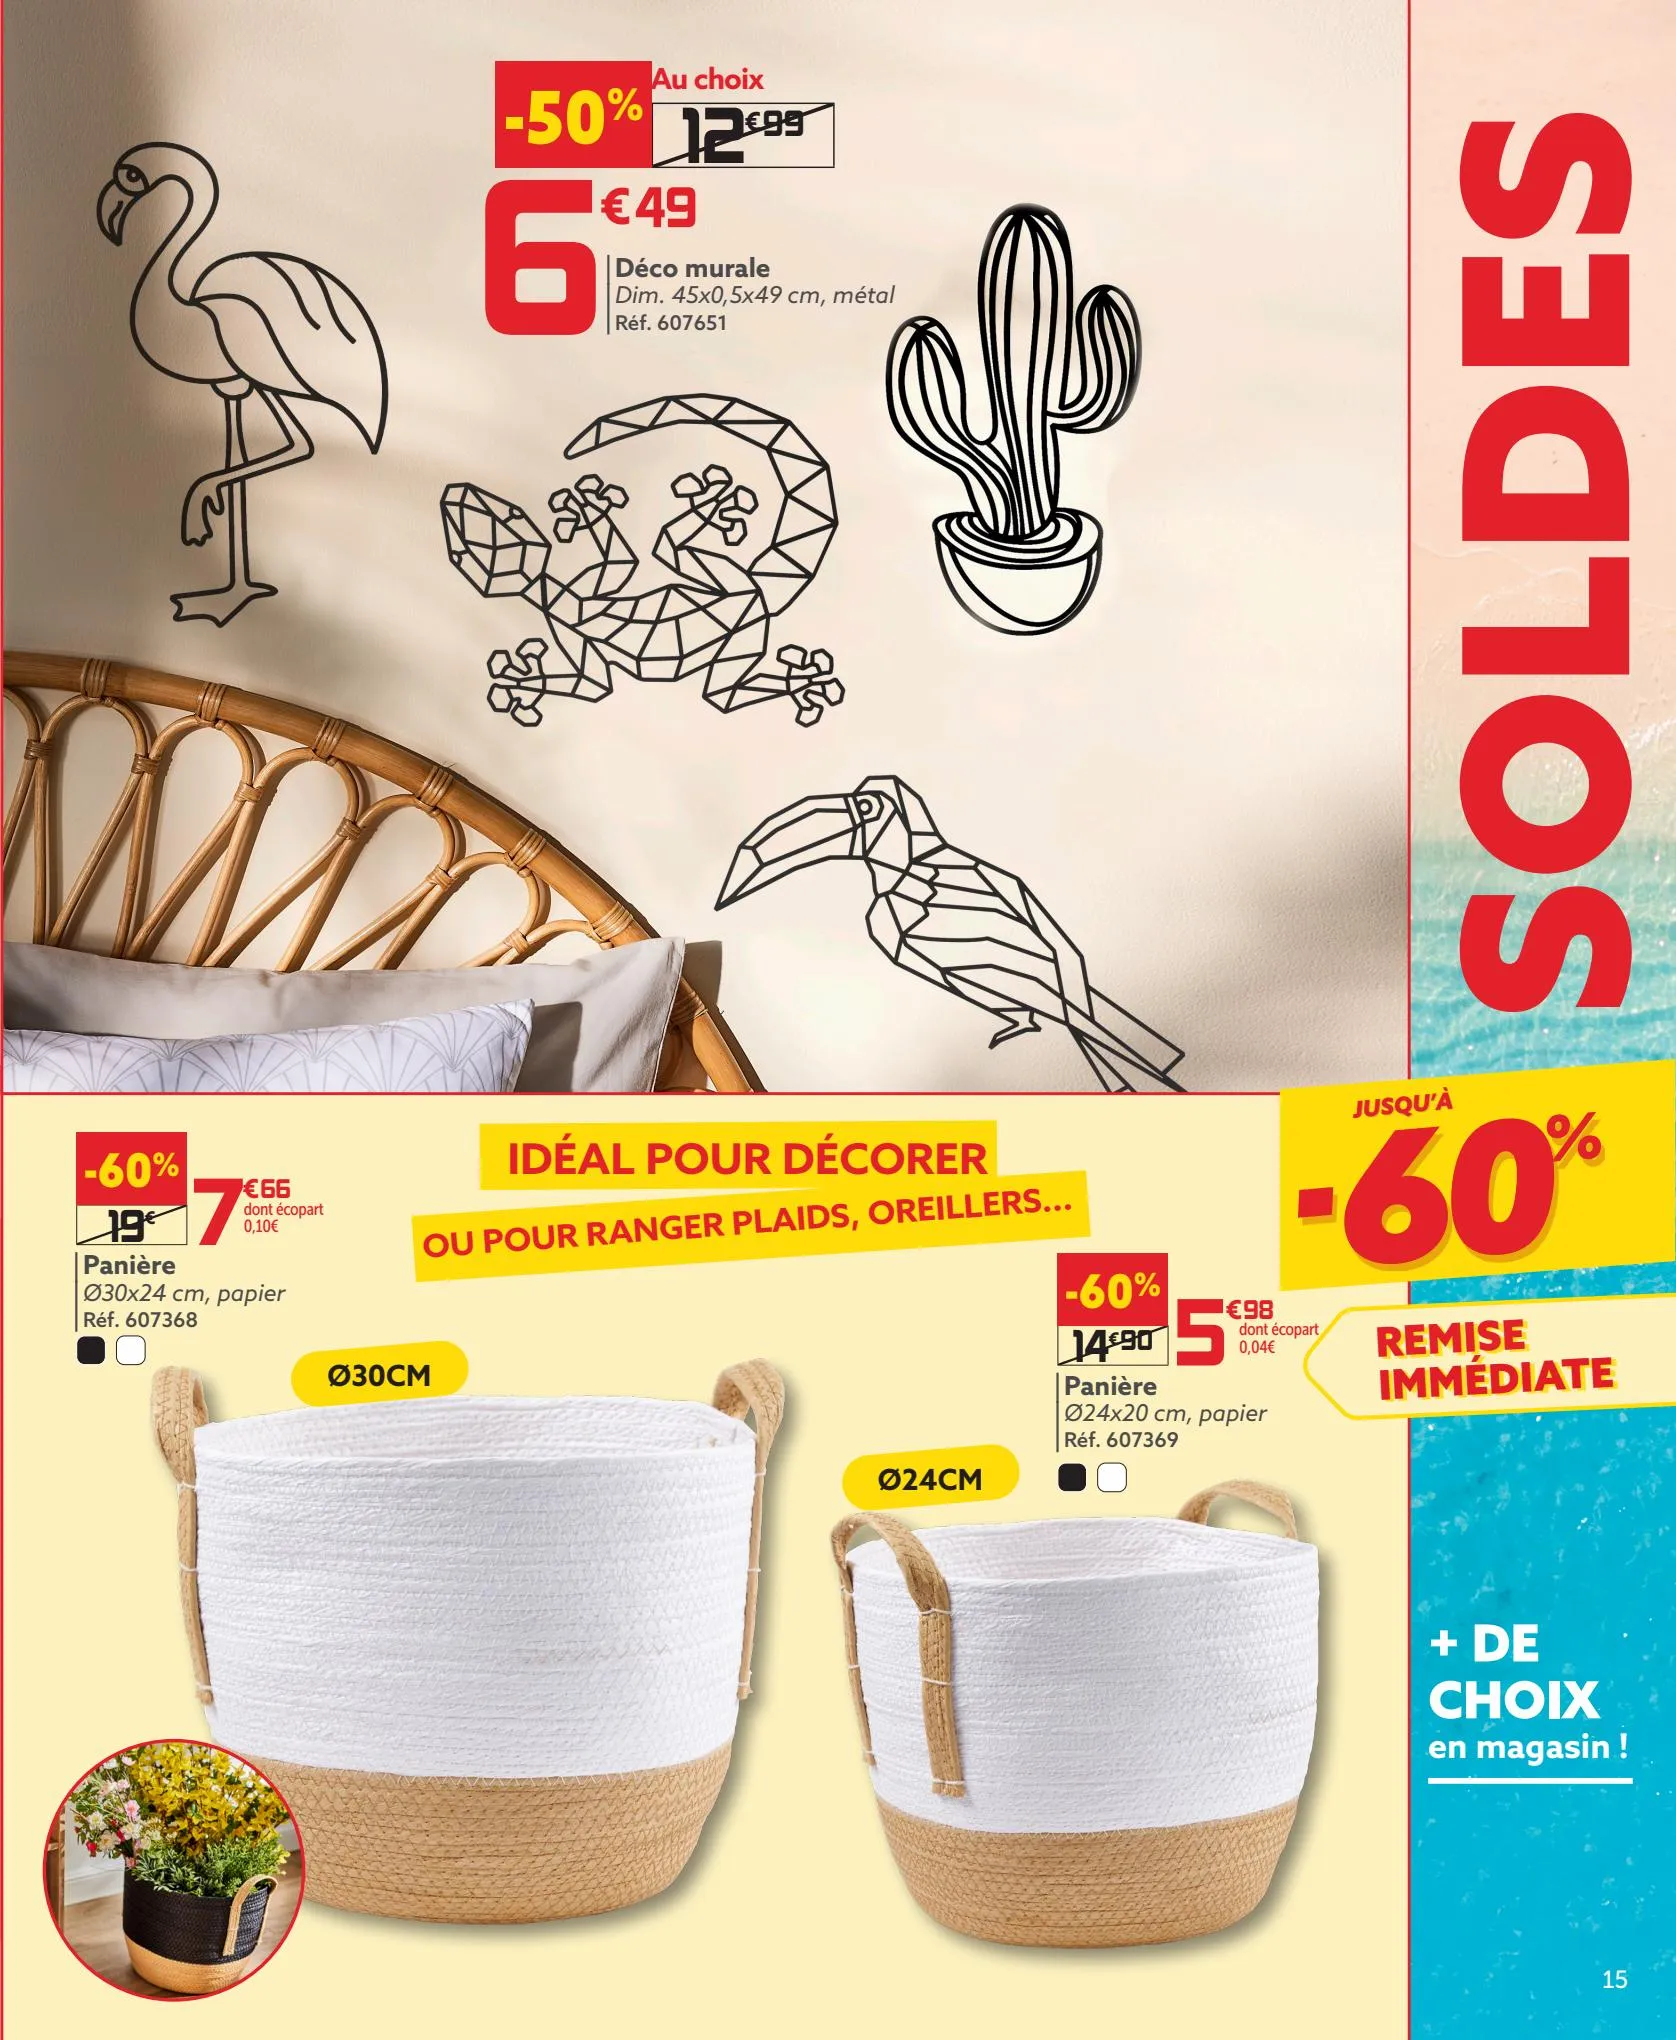 Catalogue Soldes, page 00015